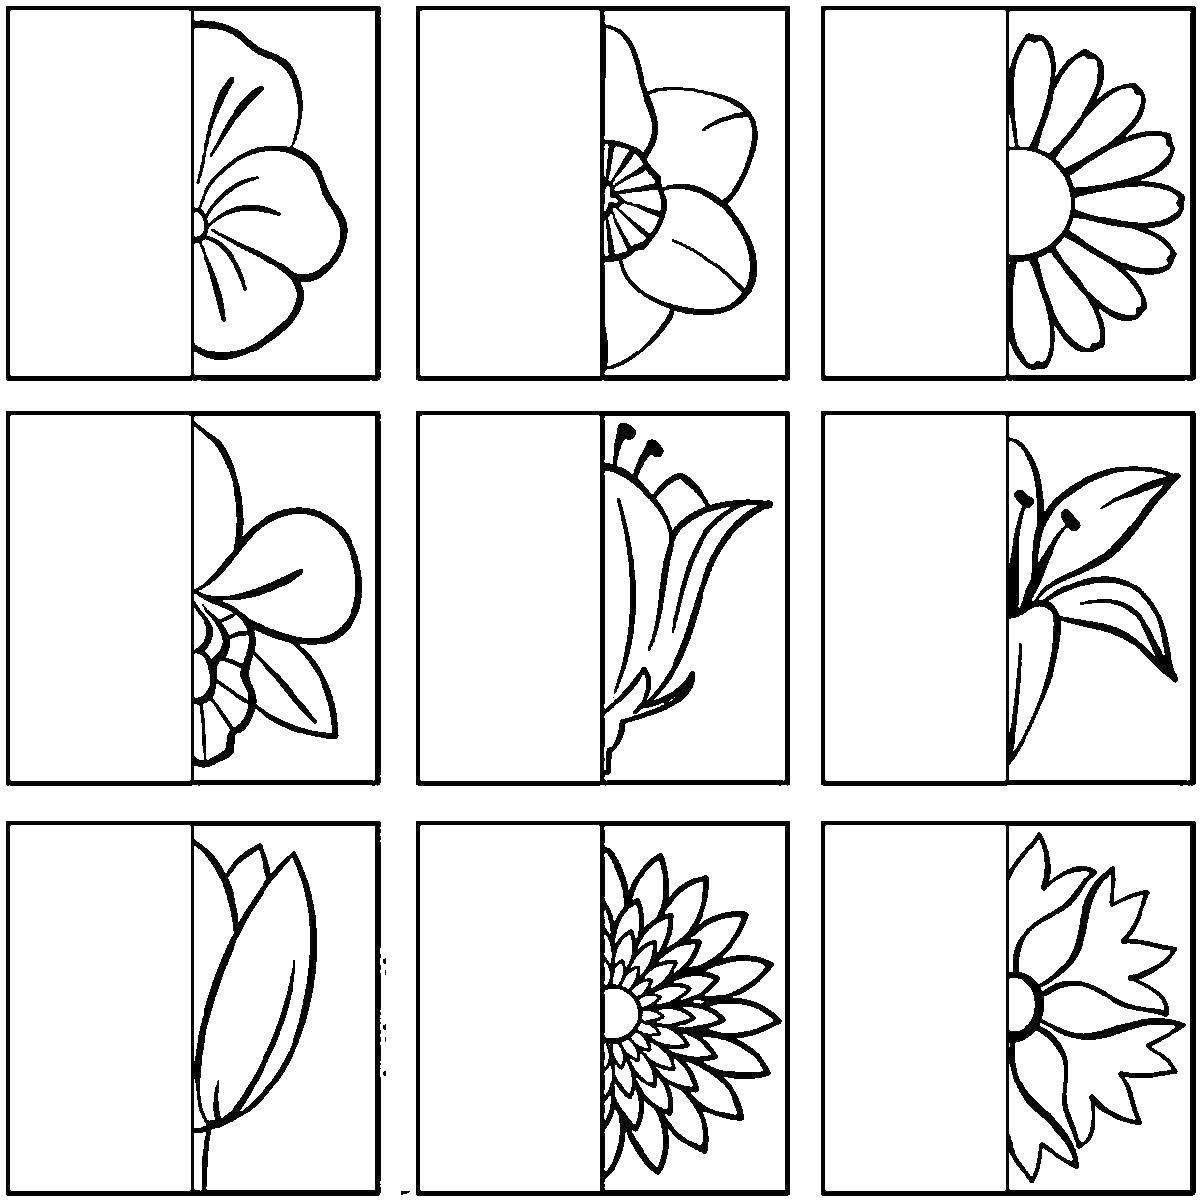 Coloring Flowers. Category fix on the model. Tags:  flowers.